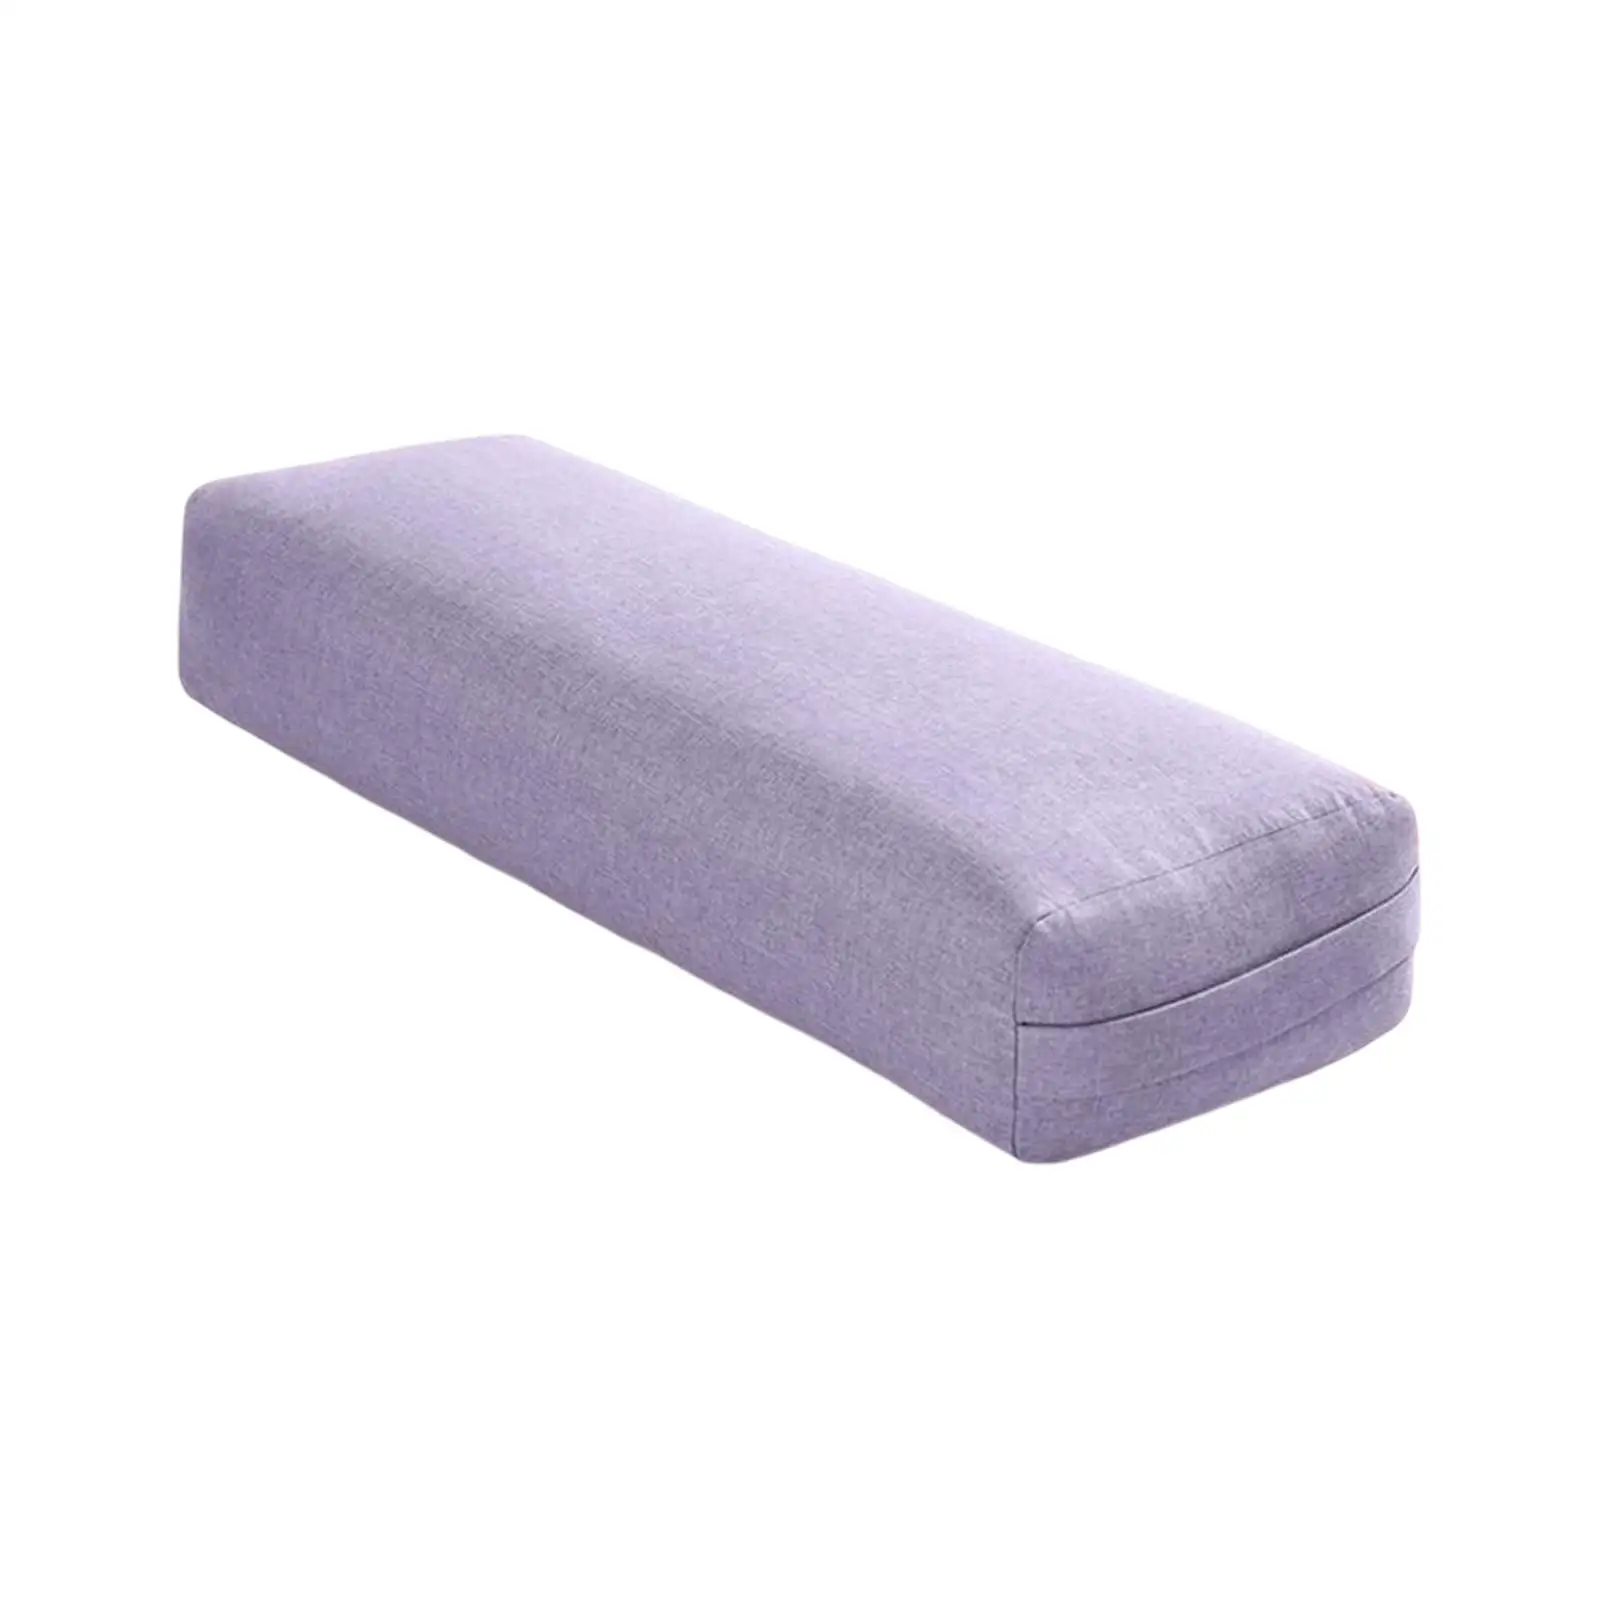 Professional Yoga Bolster with Carry Handle Meditation Cushion for Support